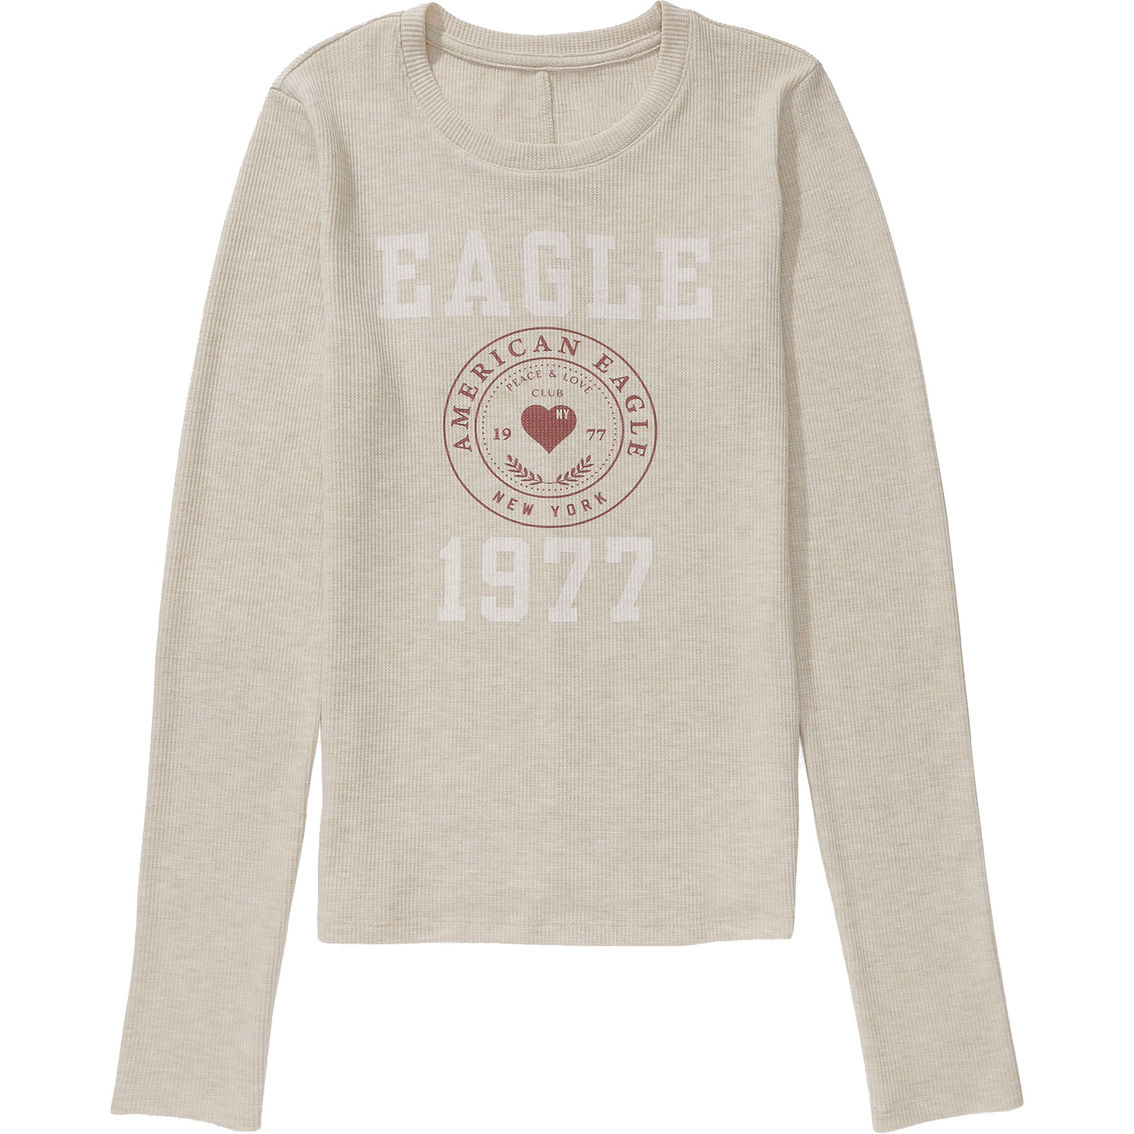 American Eagle Thermal Crew Neck Tee - Image 3 of 4